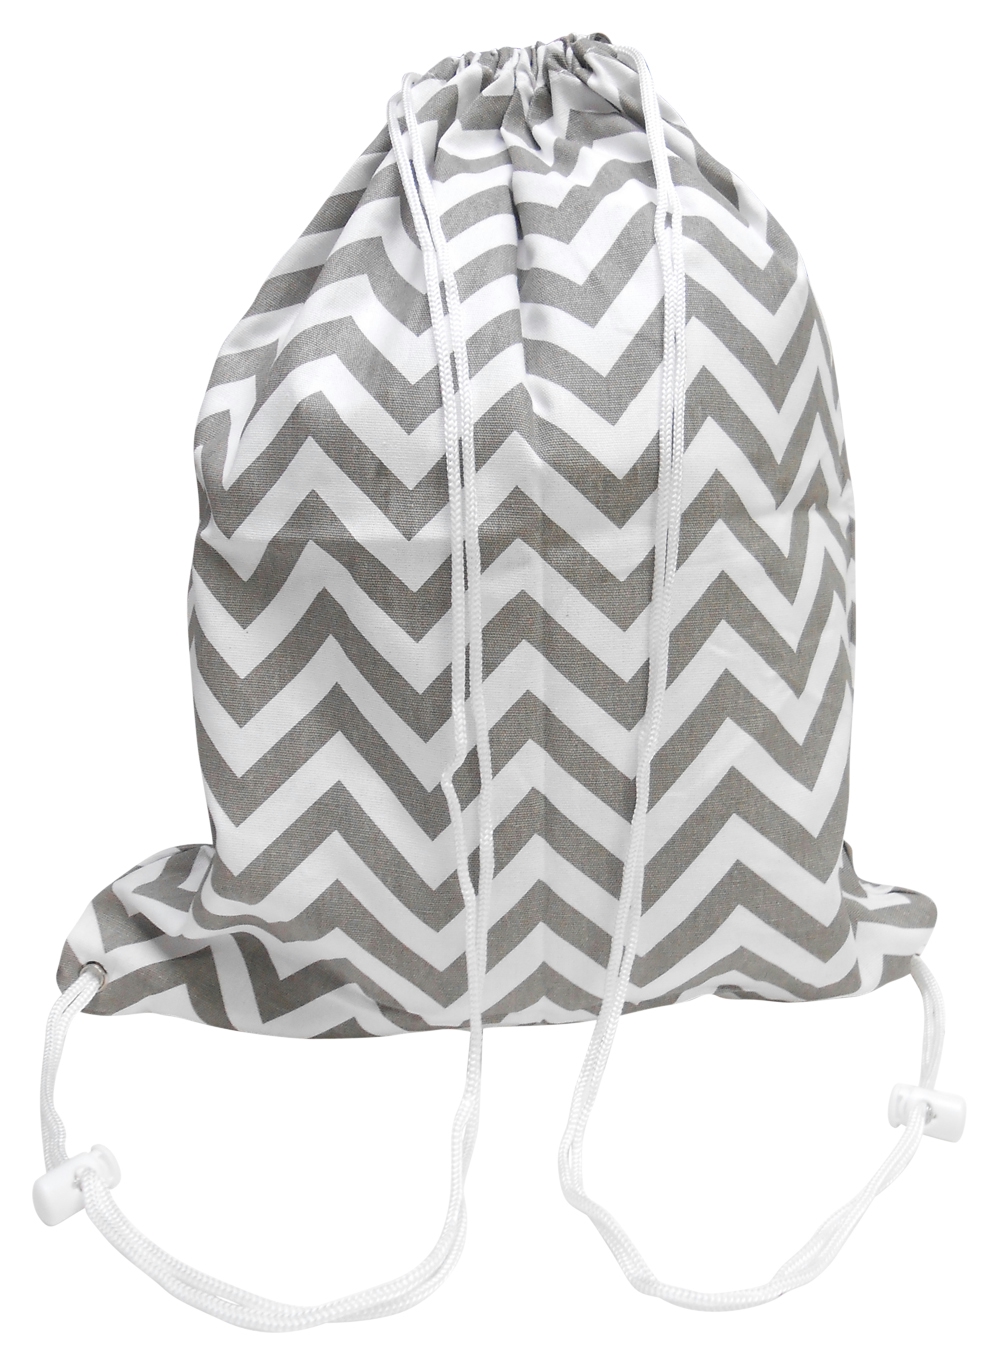 Gym Bag Drawstring Pack Embroidery Blanks in Chevron Print - GRAY